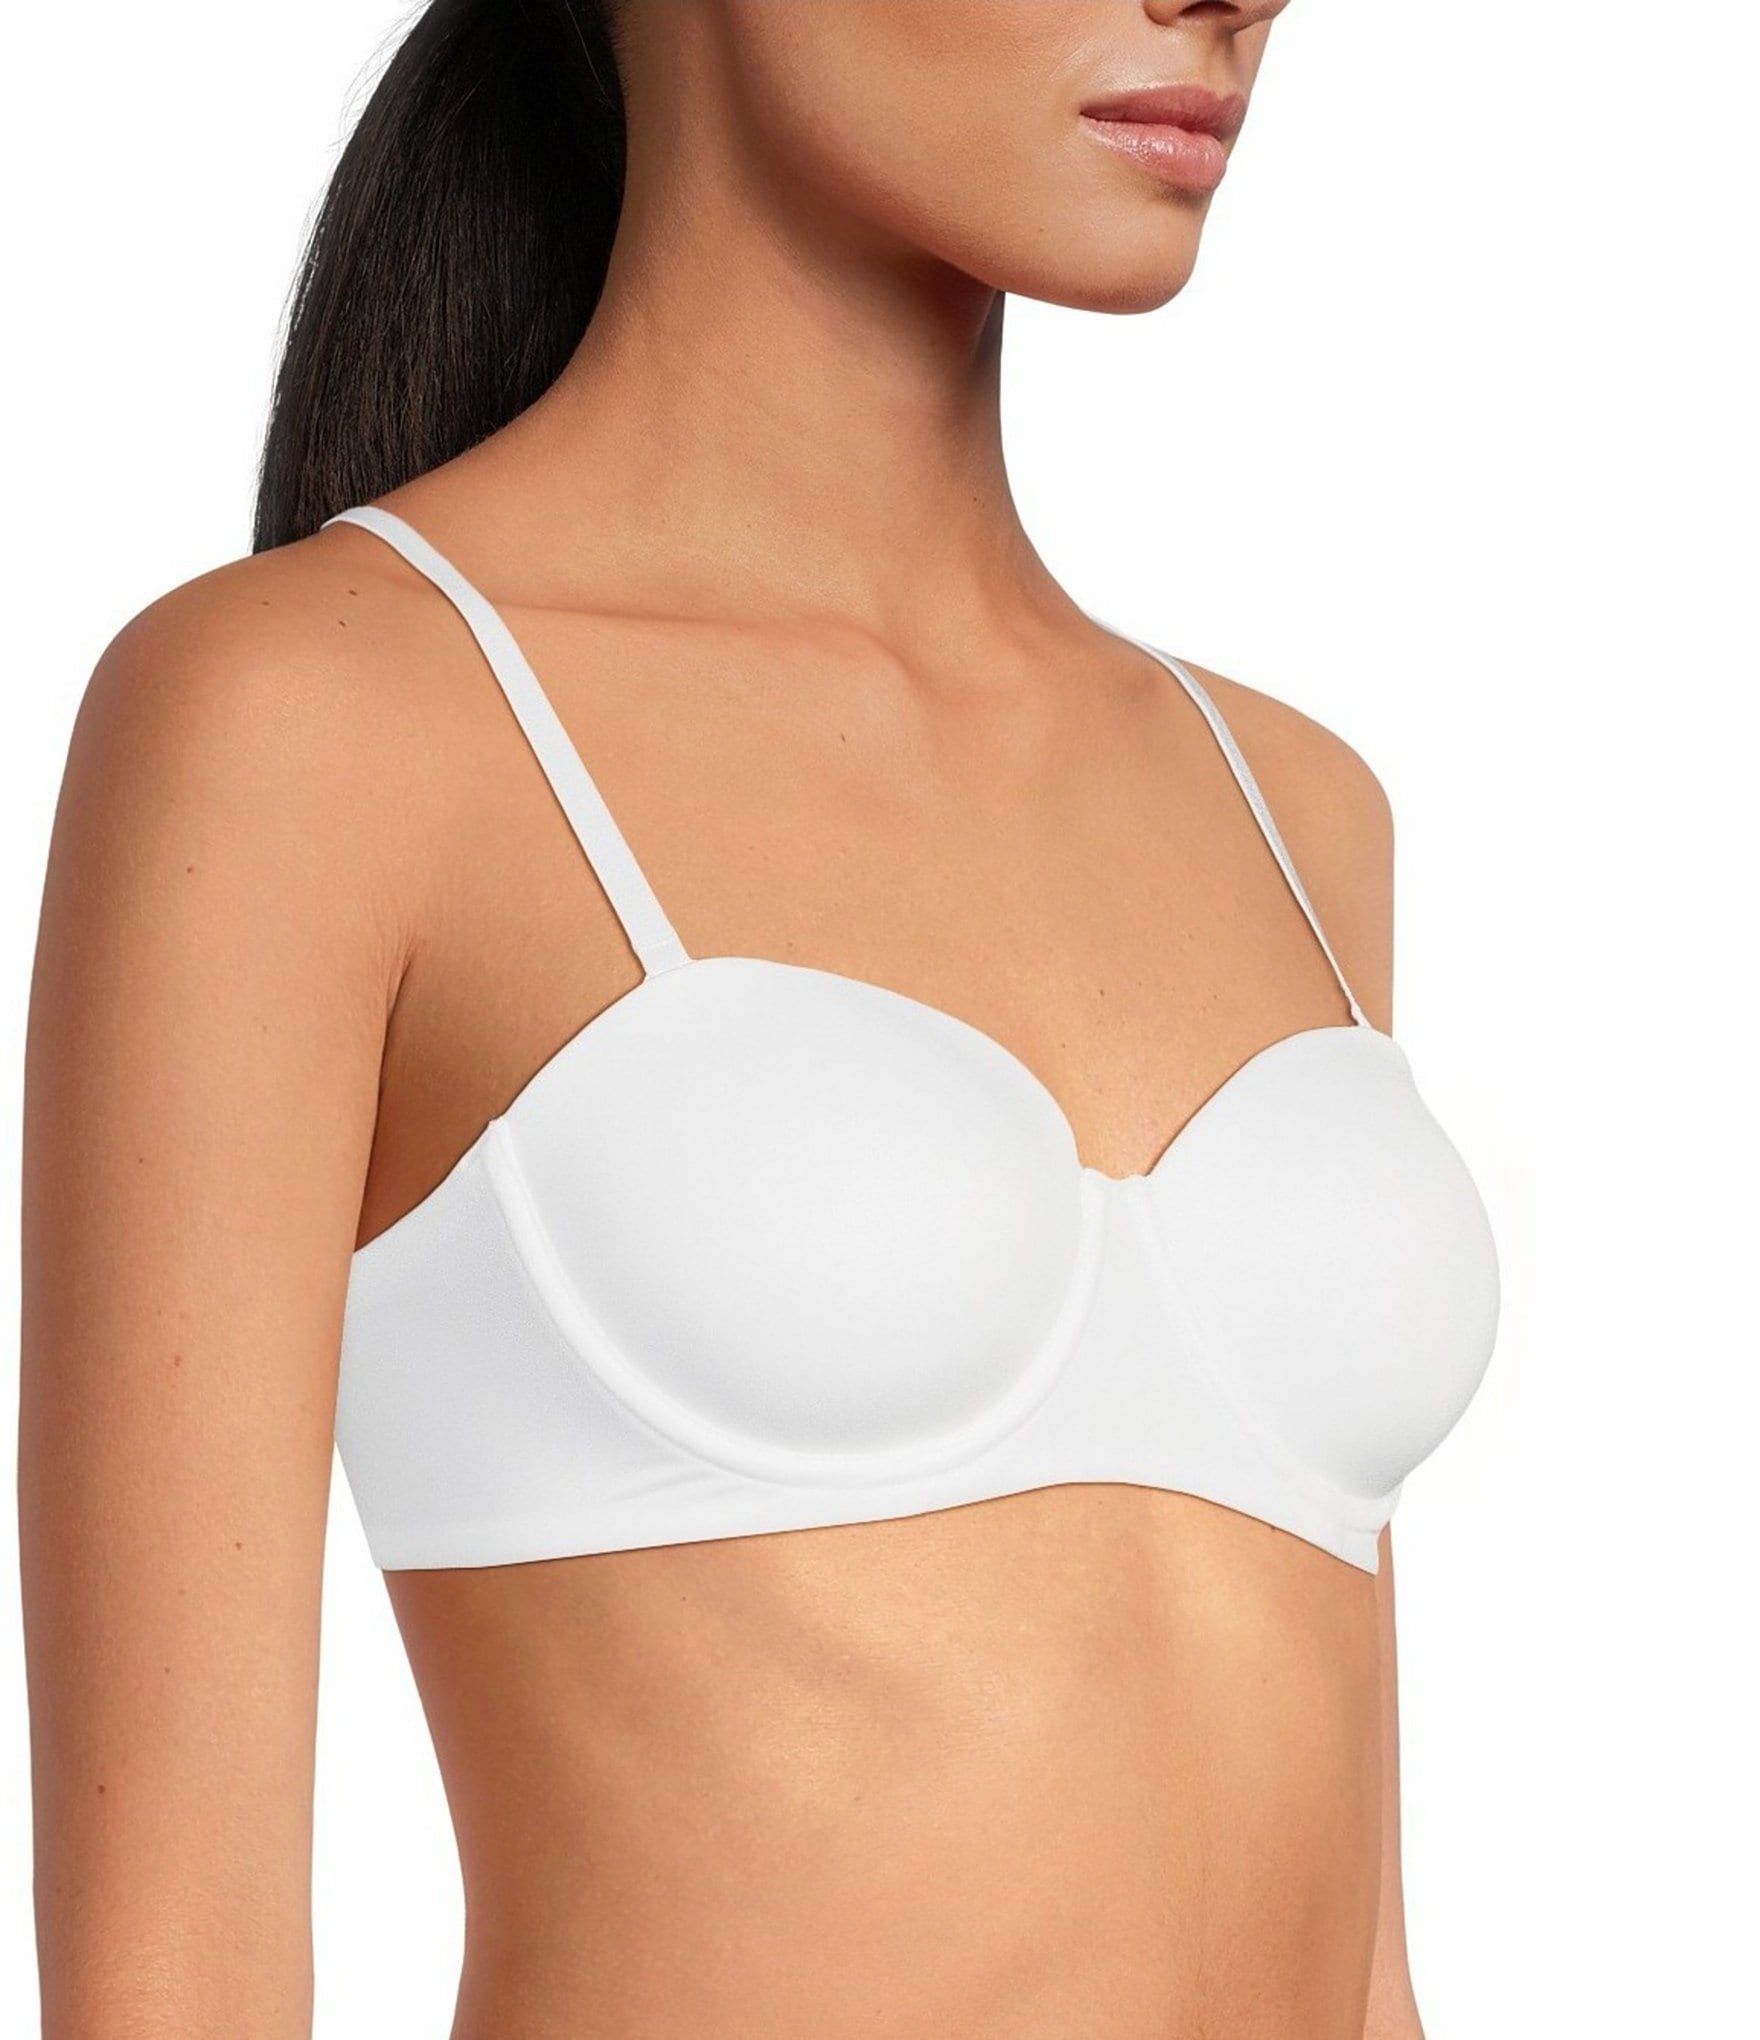 Best Girls White Strapless Bra Size 30a. Good Condition for sale